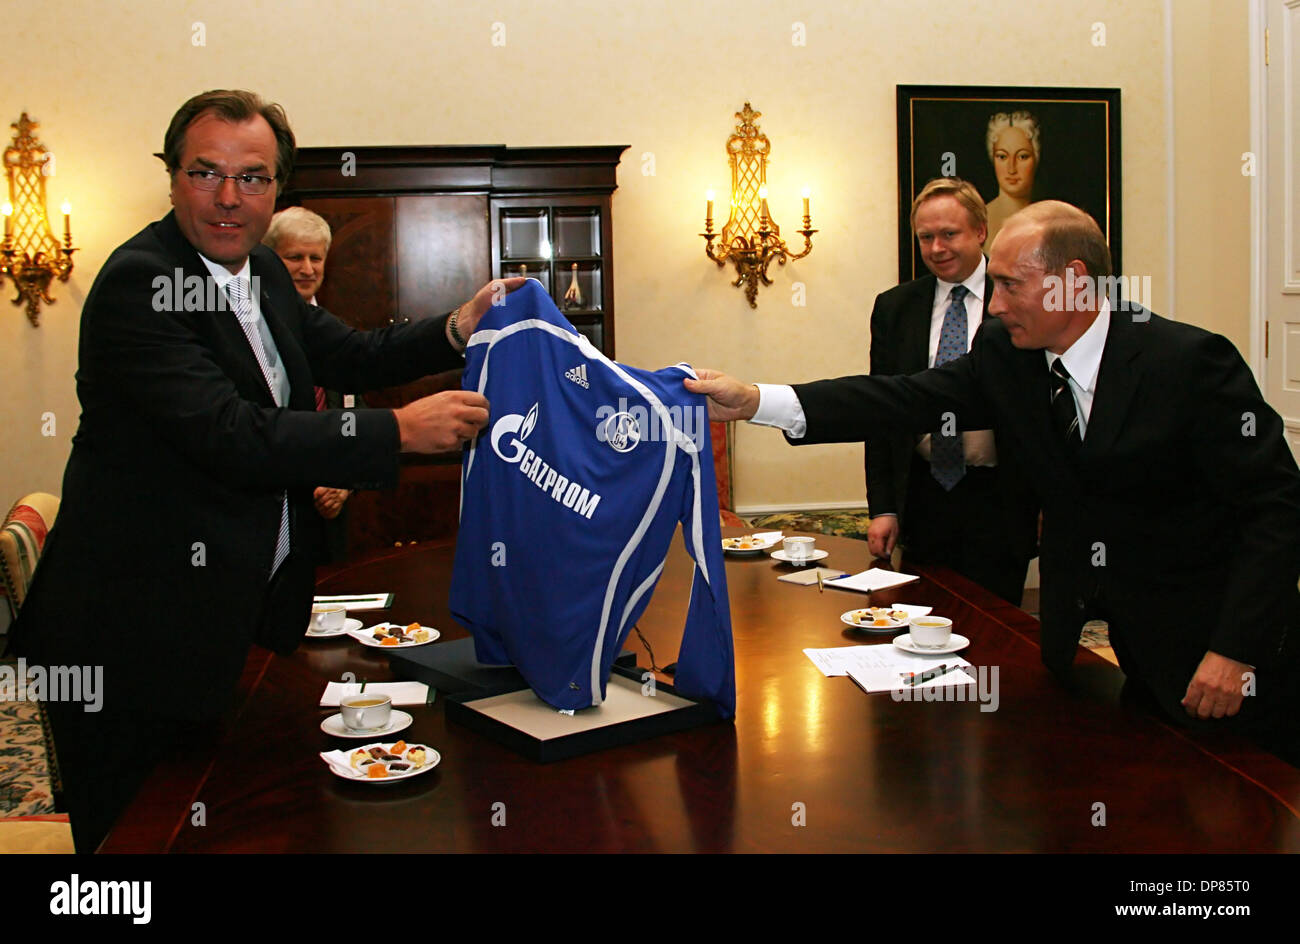 Vladimir Putin in Germany was presented a football T-shirt of Schalke-04 FC with Gazprom logo on it (Gazprom is a sponsor of Schalke FC). (Credit Image: © PhotoXpress/ZUMA Press) RESTRICTIONS: North and South America Rights ONLY! Stock Photo